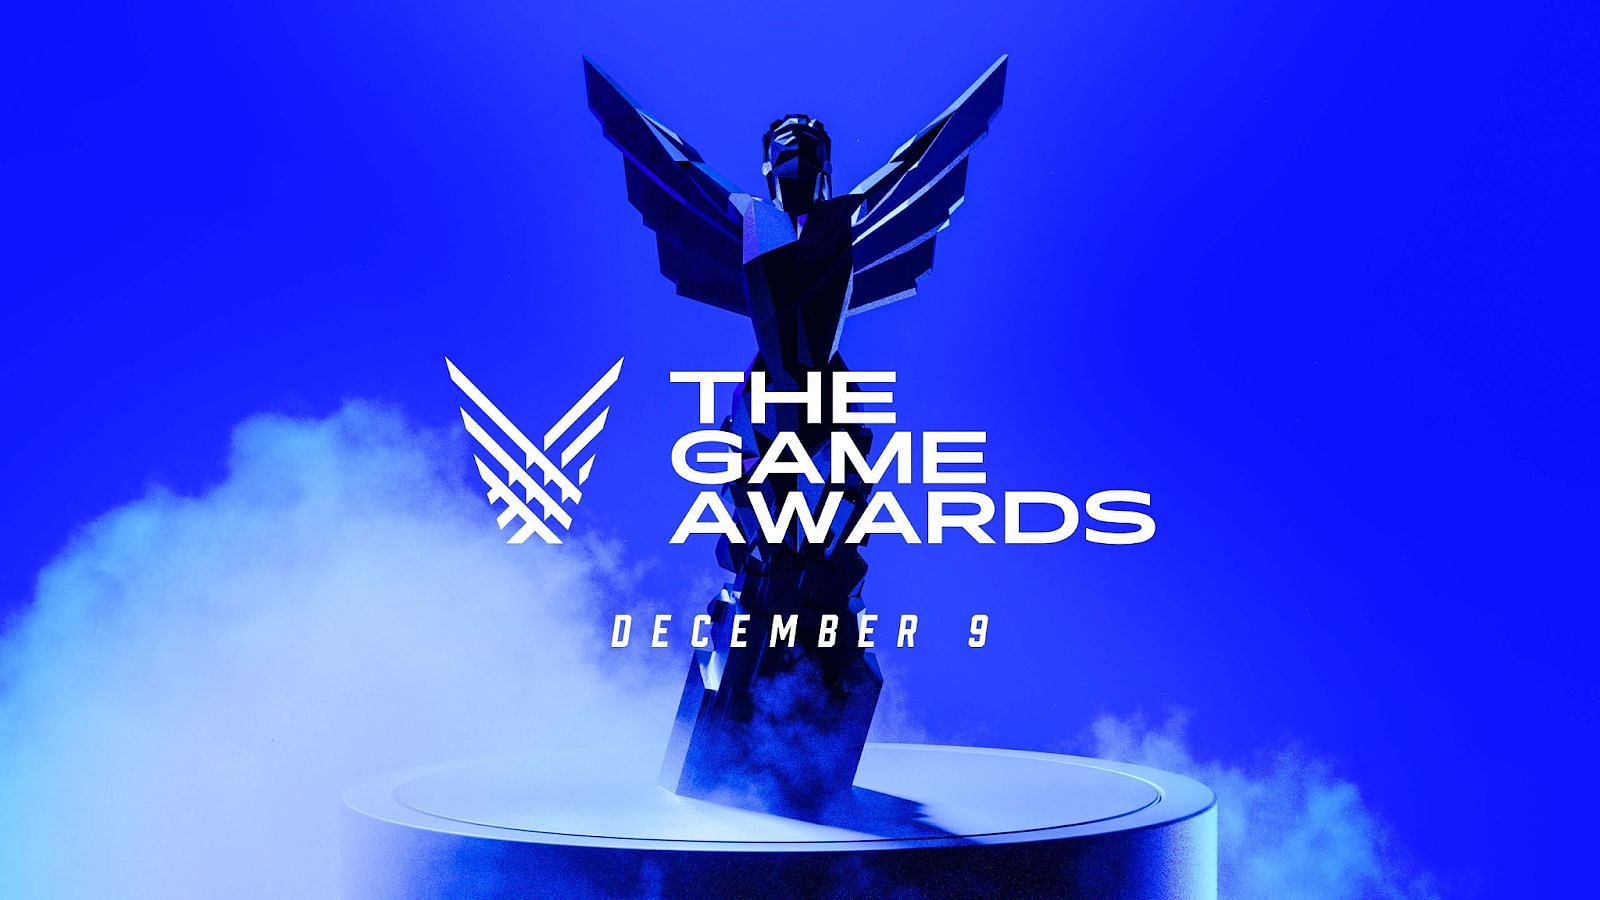 Game of the Year at the Game Awards (Image by The Game Awards)